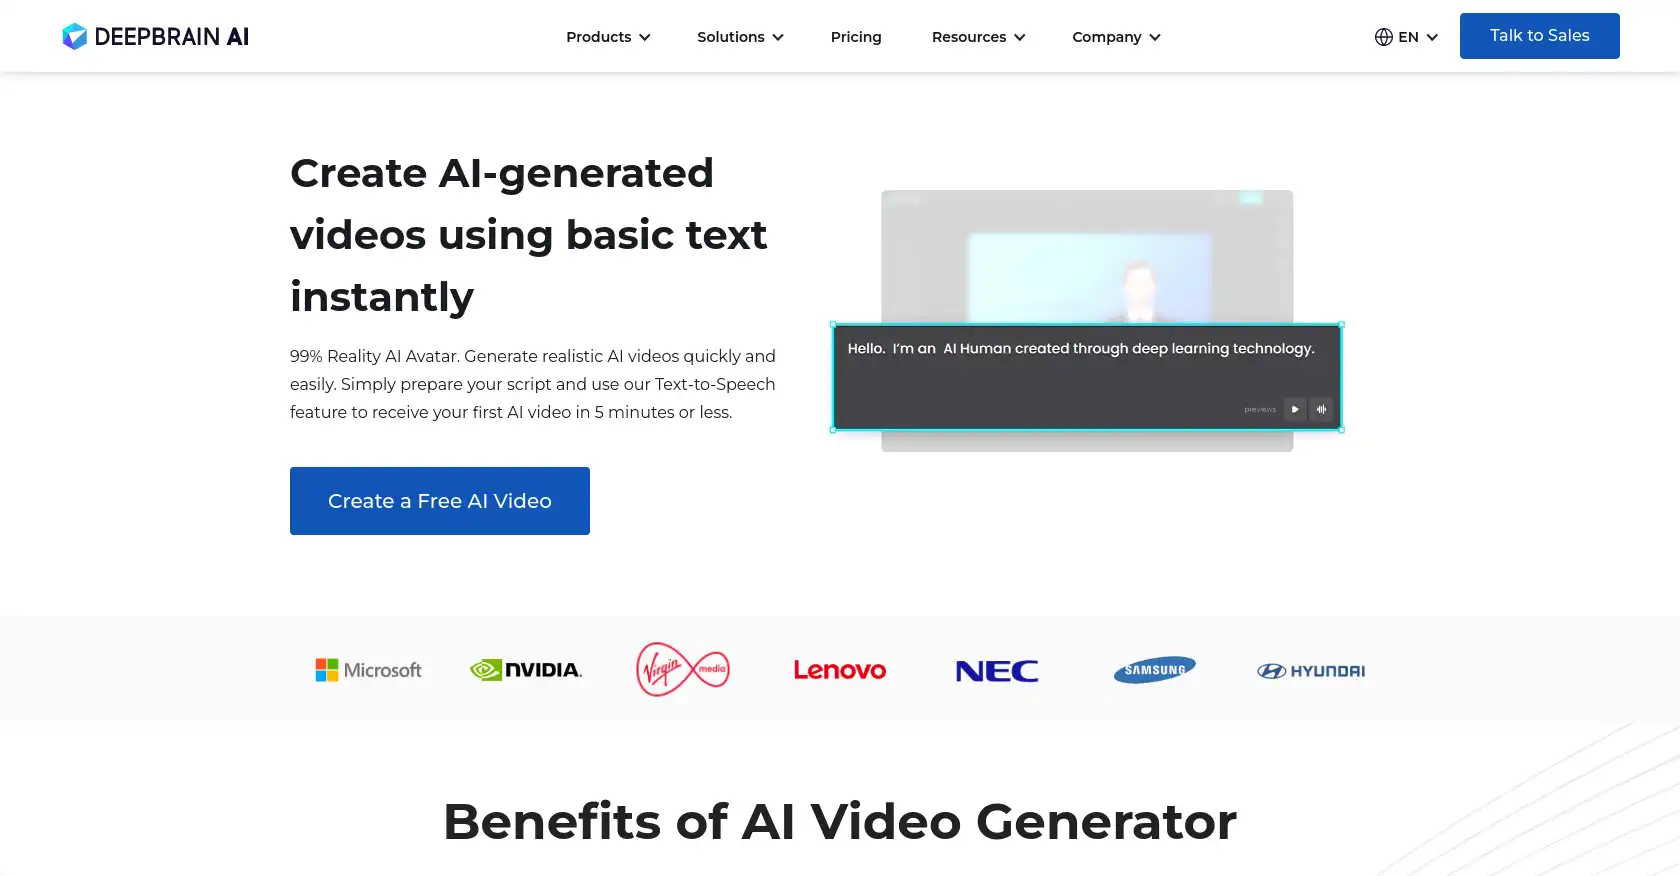 DeepBrain AI - AI tool for Video Creation, Text-to-Video